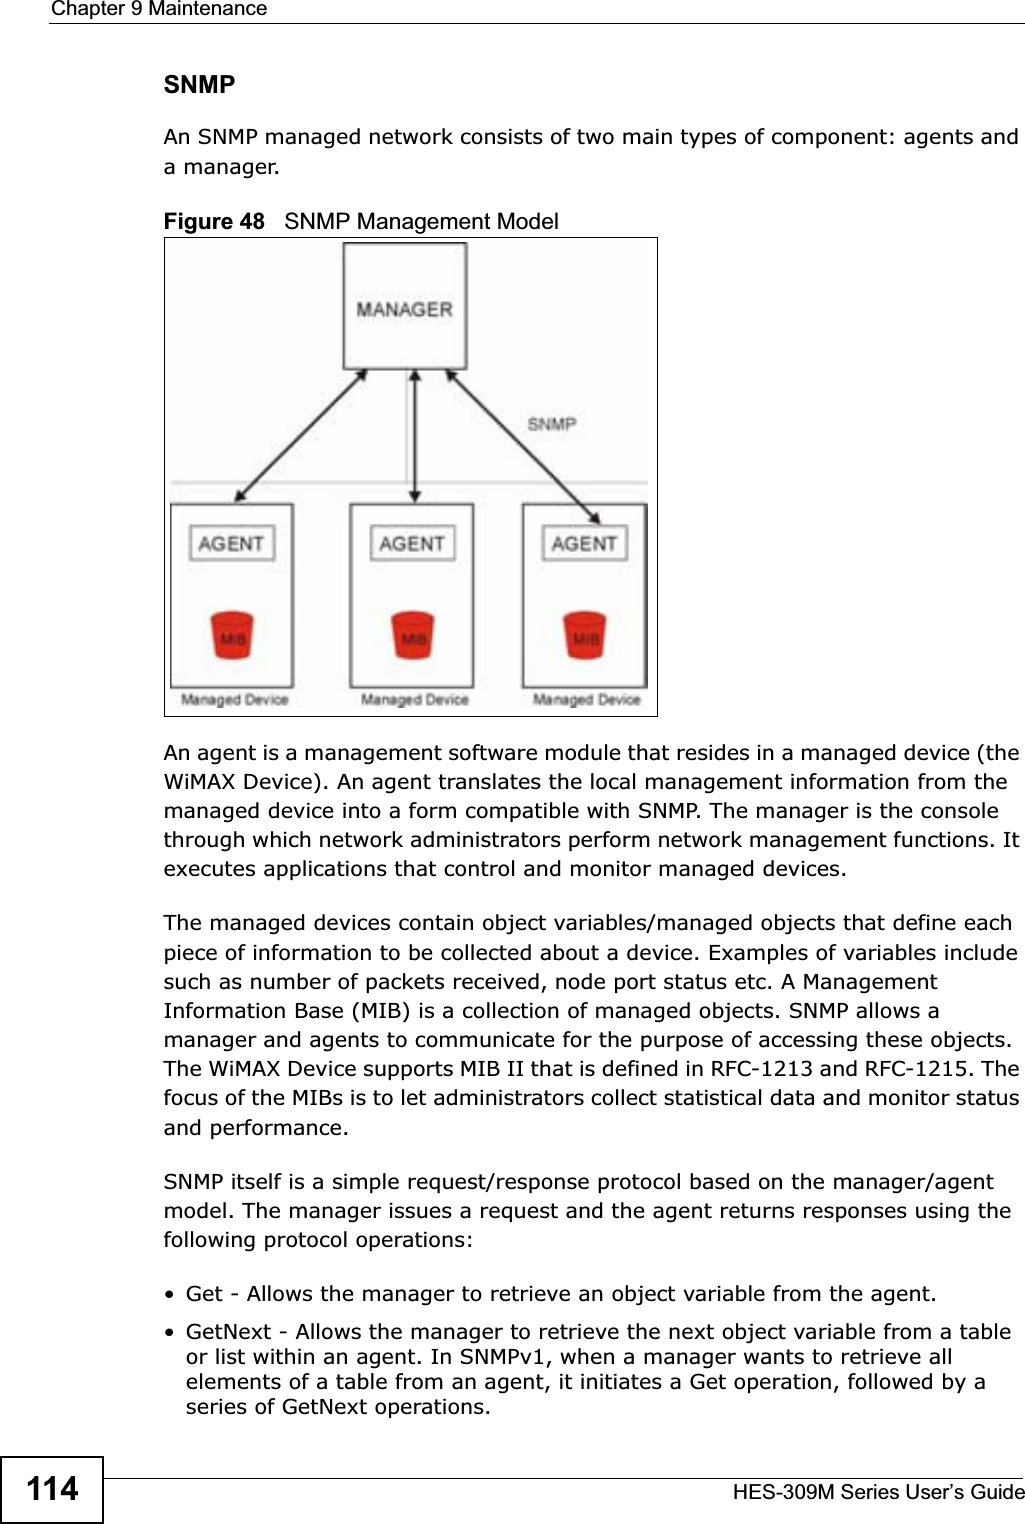 Chapter 9 MaintenanceHES-309M Series User’s Guide114SNMPAn SNMP managed network consists of two main types of component: agents and a manager.Figure 48   SNMP Management ModelAn agent is a management software module that resides in a managed device (the WiMAX Device). An agent translates the local management information from the managed device into a form compatible with SNMP. The manager is the console through which network administrators perform network management functions. It executes applications that control and monitor managed devices. The managed devices contain object variables/managed objects that define each piece of information to be collected about a device. Examples of variables include such as number of packets received, node port status etc. A Management Information Base (MIB) is a collection of managed objects. SNMP allows a manager and agents to communicate for the purpose of accessing these objects. The WiMAX Device supports MIB II that is defined in RFC-1213 and RFC-1215. The focus of the MIBs is to let administrators collect statistical data and monitor status and performance.SNMP itself is a simple request/response protocol based on the manager/agent model. The manager issues a request and the agent returns responses using the following protocol operations: • Get - Allows the manager to retrieve an object variable from the agent. • GetNext - Allows the manager to retrieve the next object variable from a table or list within an agent. In SNMPv1, when a manager wants to retrieve all elements of a table from an agent, it initiates a Get operation, followed by a series of GetNext operations. 